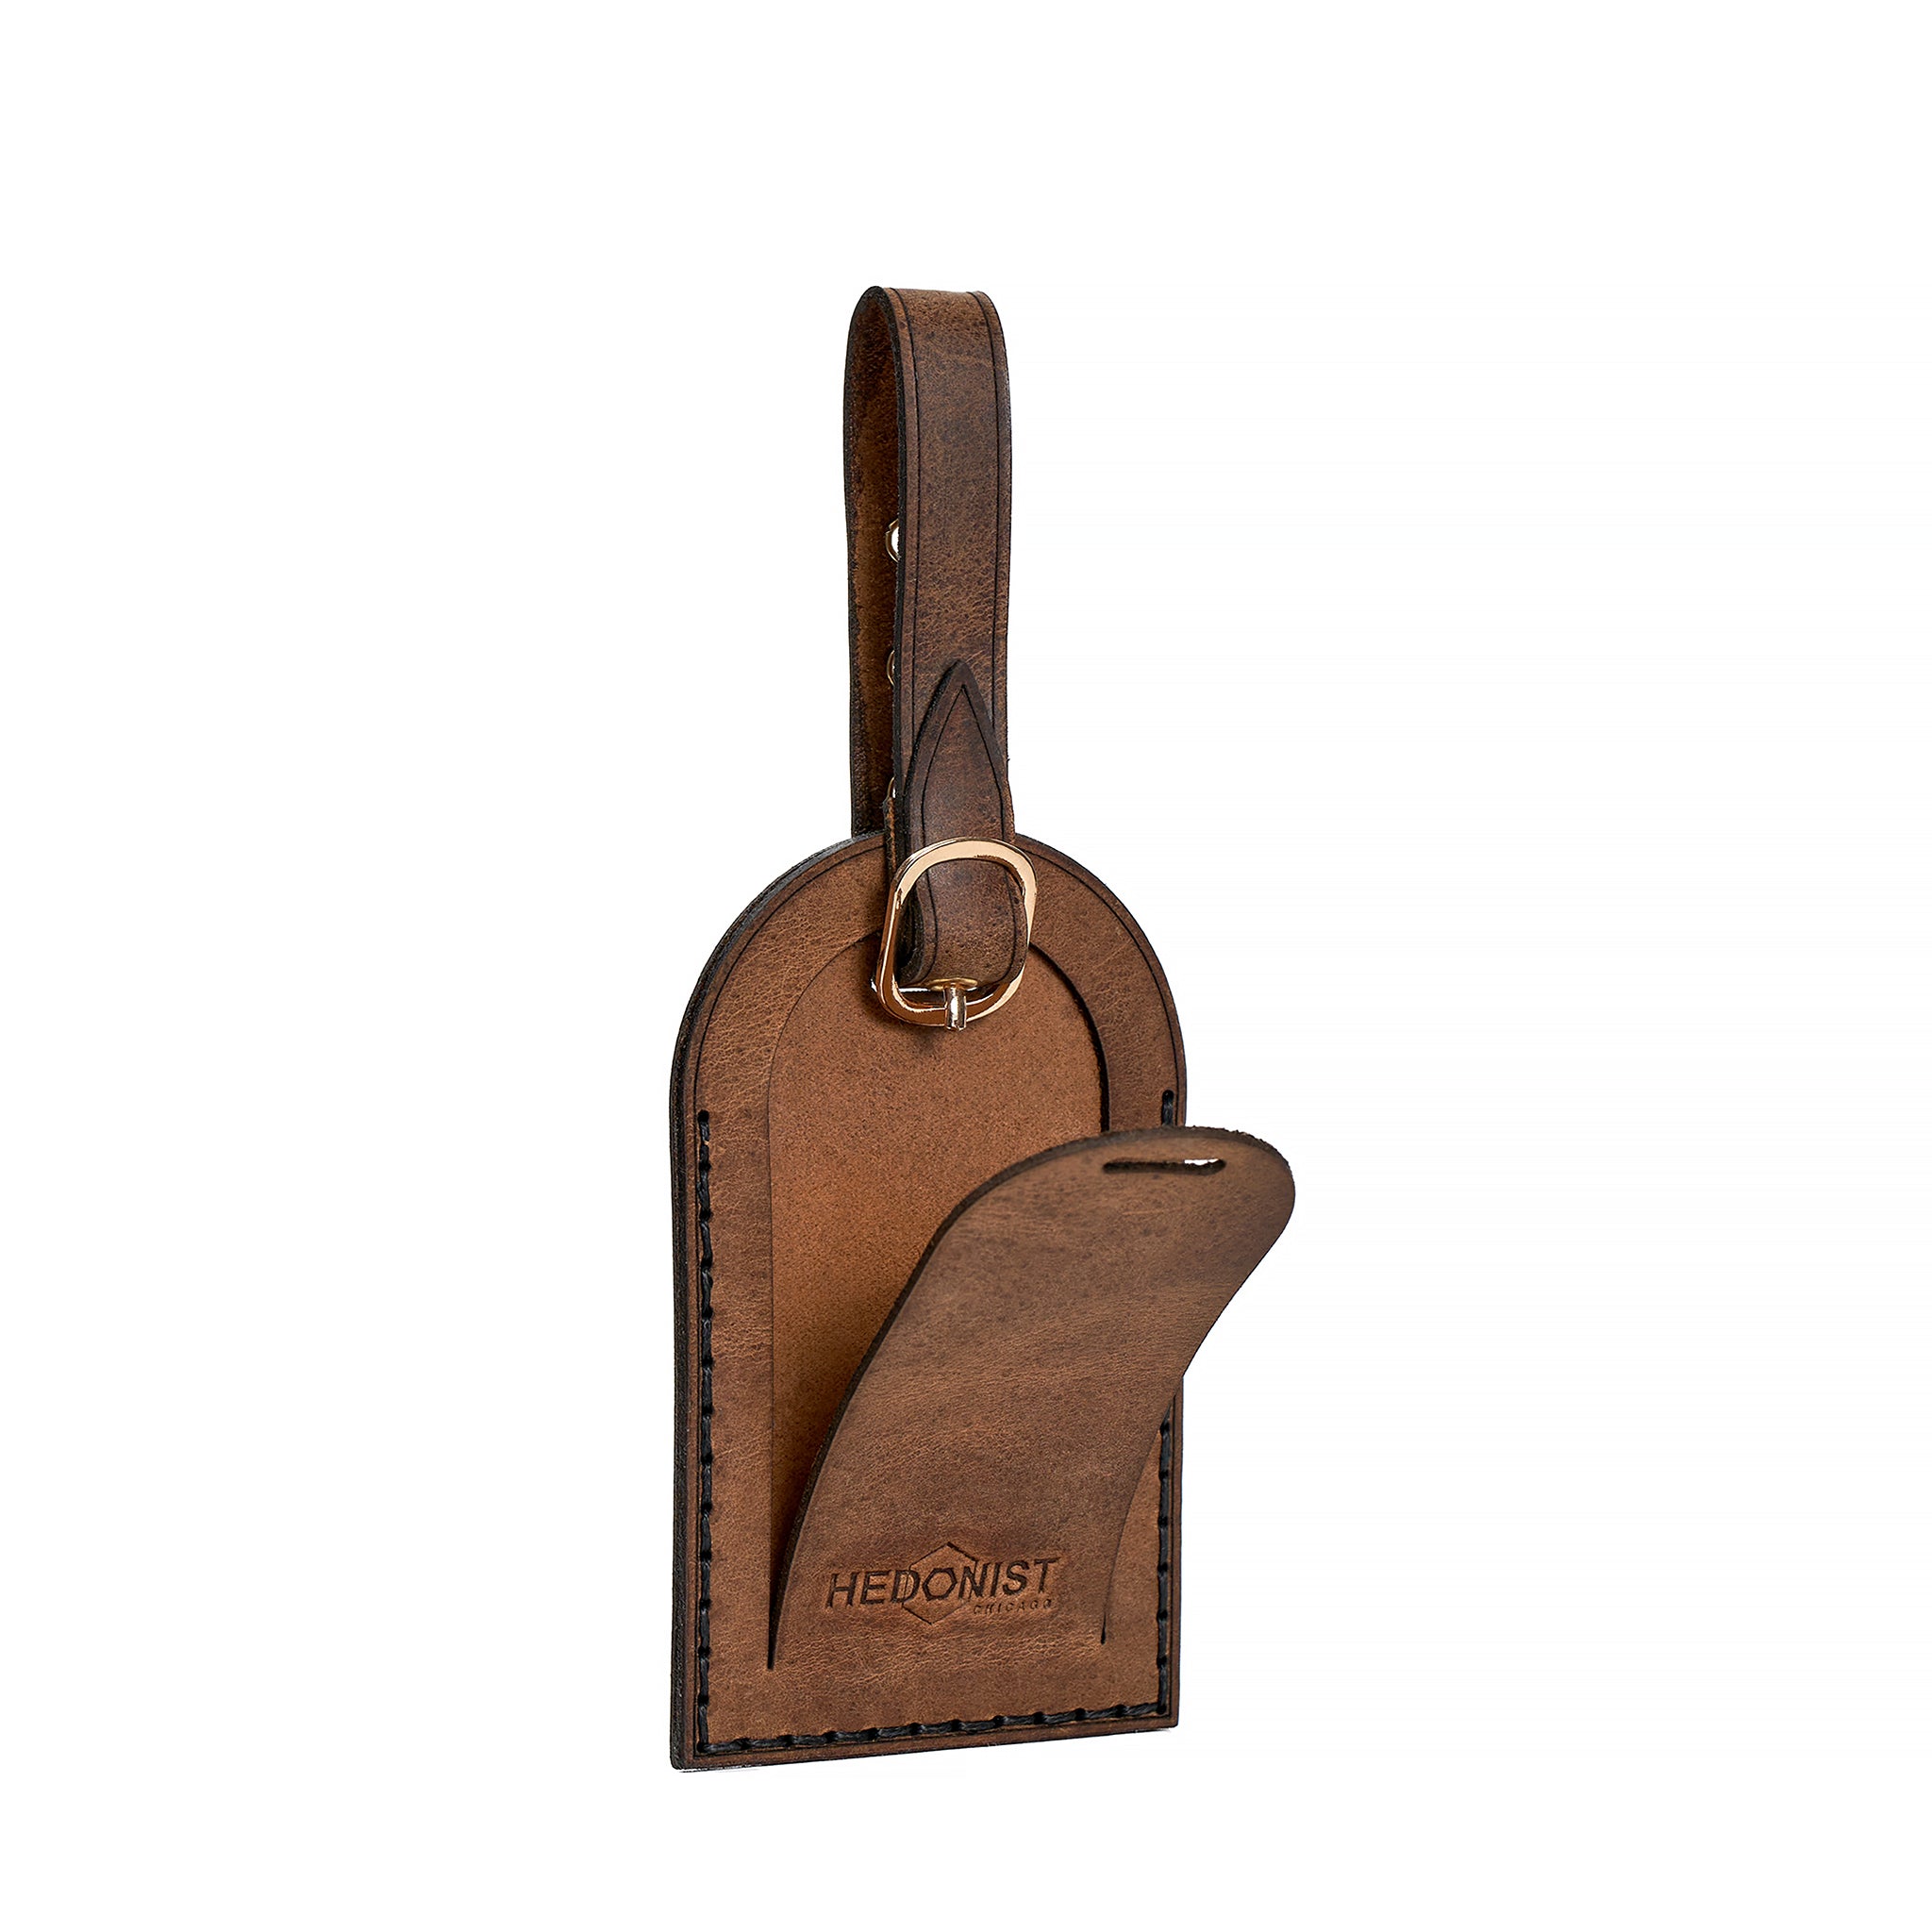 Handmade Leather Luggage Tag Whisky Pull Up 33201749983383